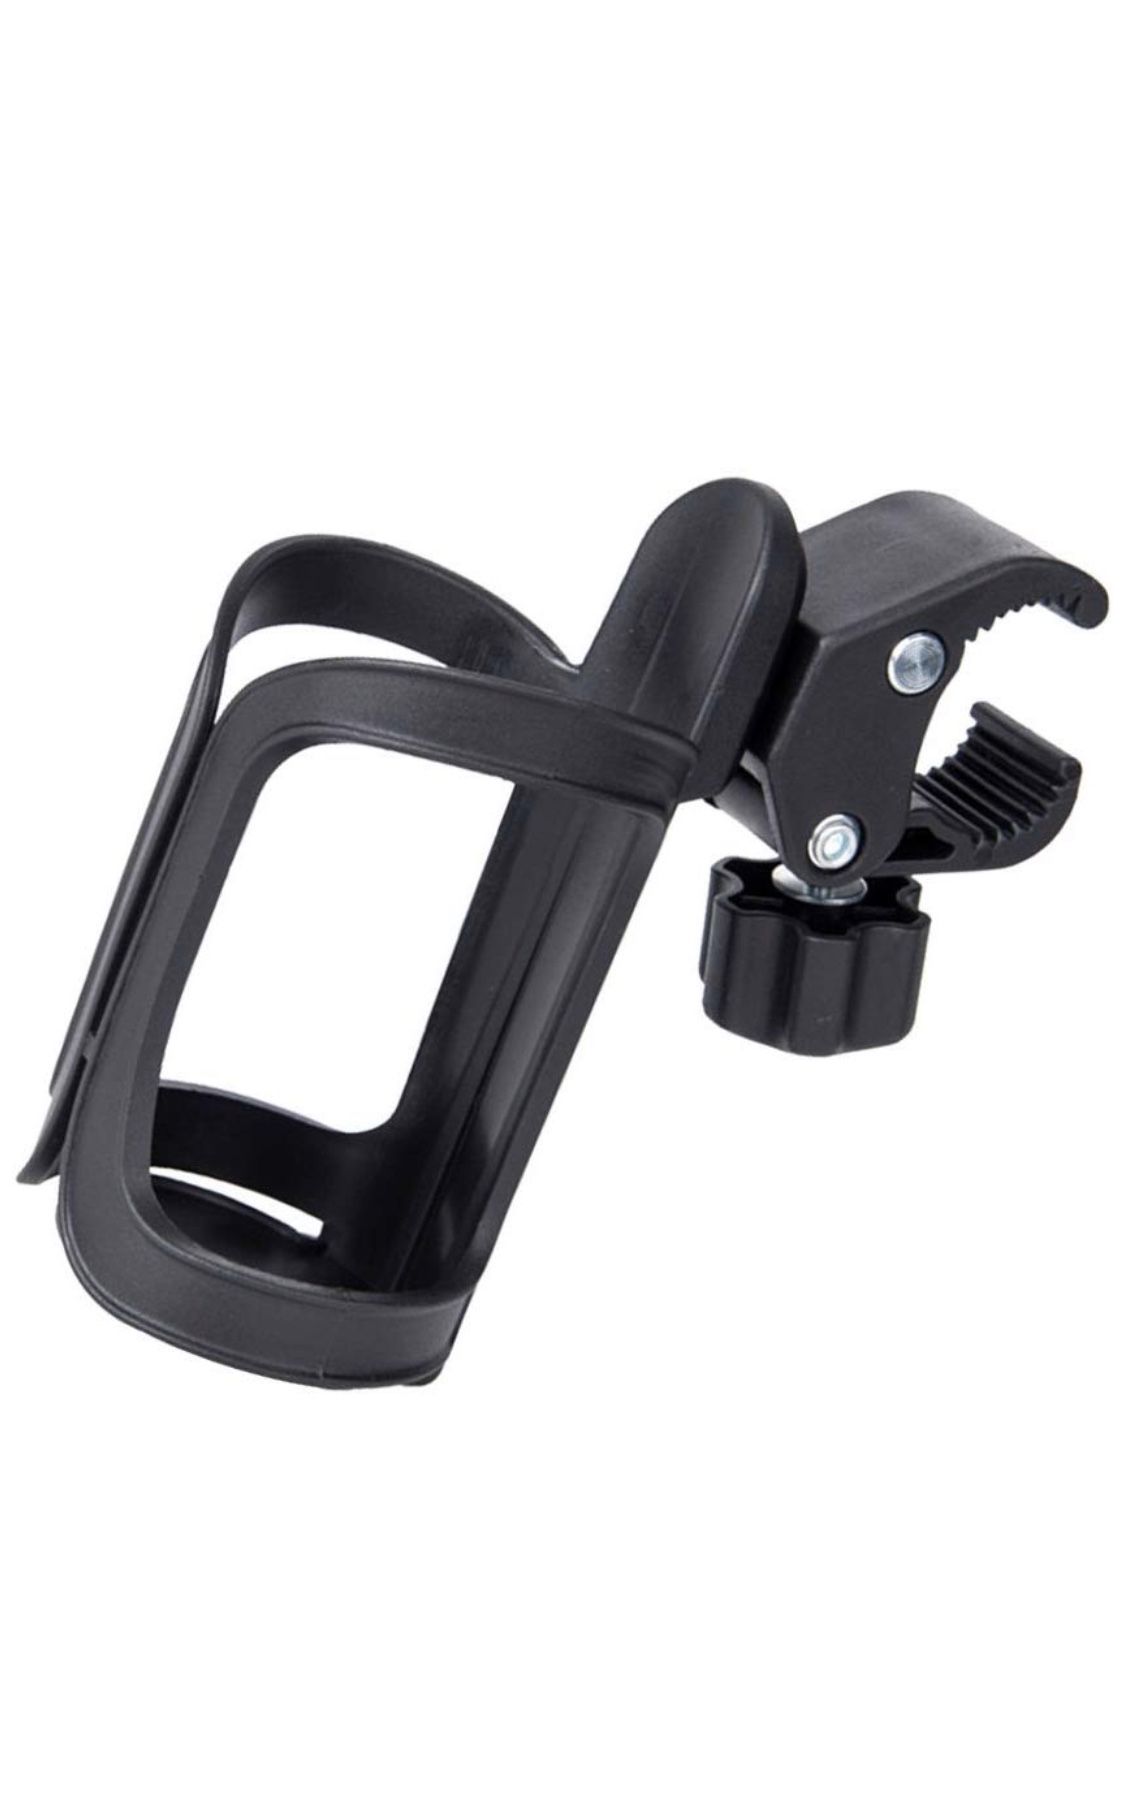 VORCOOL Baby Stroller Cup Holder Drink Holder Rack Cage 360 Degree Rotation Antislip Bottlefor Bicycles Mountain Bikes Baby Strollers and Wheelchair(